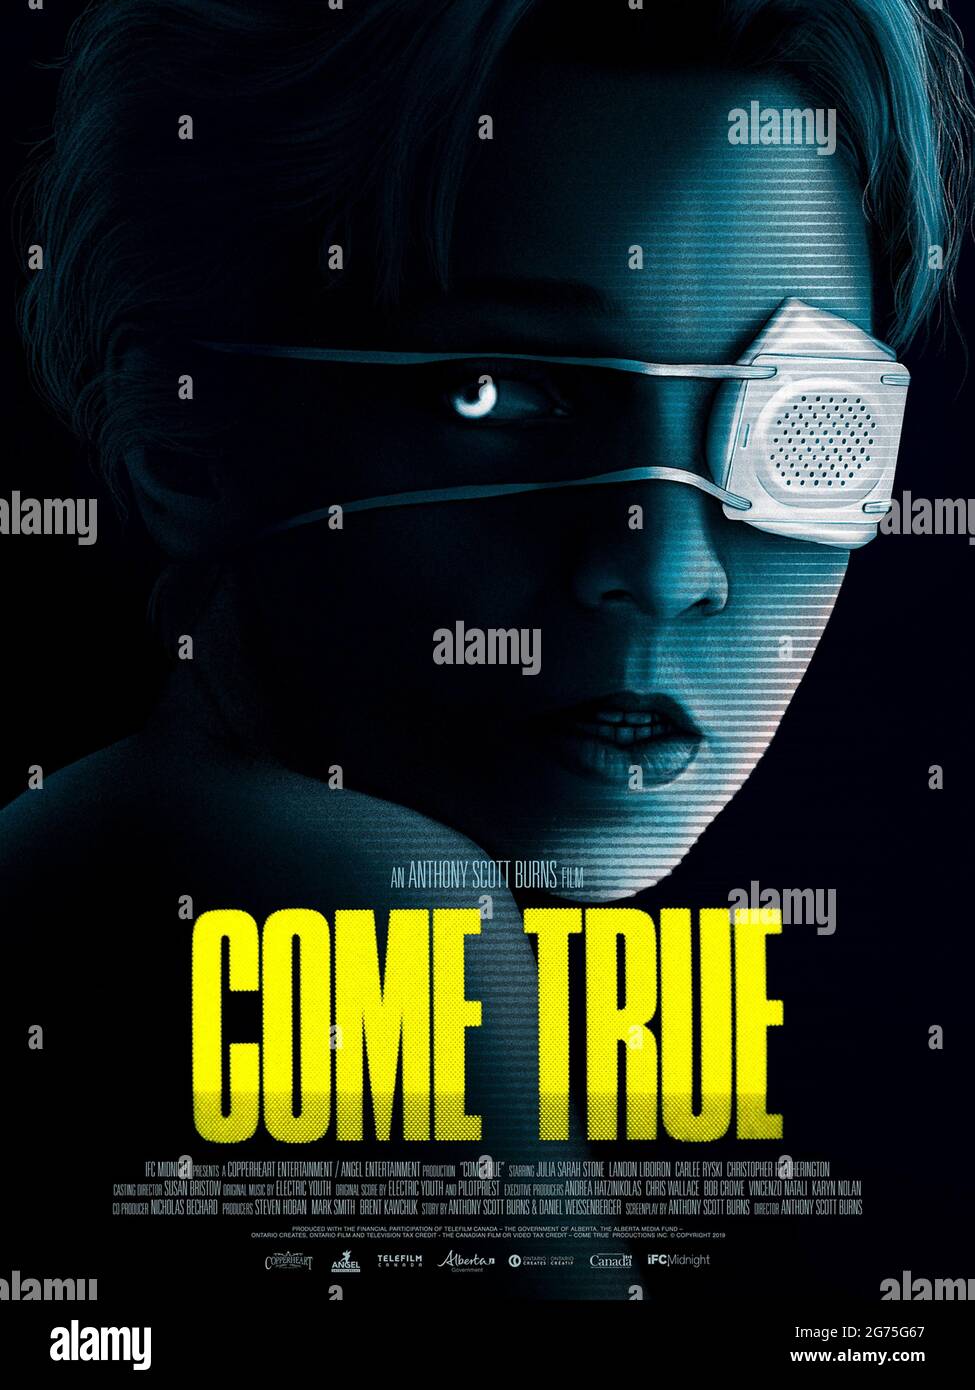 Come True (2020) directed by Anthony Scott Burns and starring Julia Sarah Stone, Landon Liboiron and Carlee Ryski. A teenage runaway takes part in a sleep study that becomes a nightmarish descent into the depths of her mind and a frightening examination of the power of dreams. Stock Photo